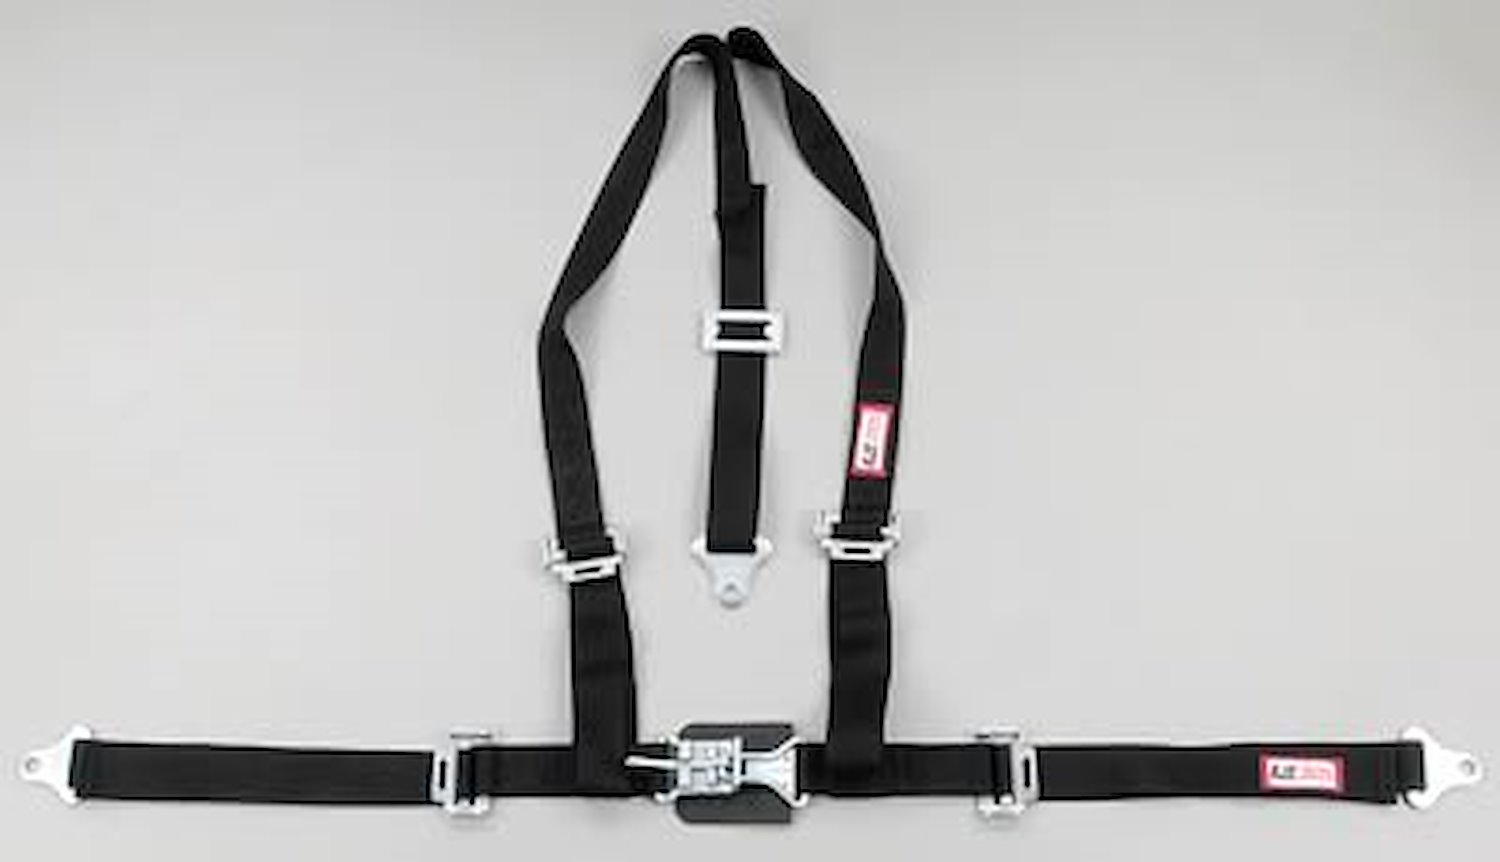 NON-SFI L&L HARNESS 2 PULL DOWN Lap Belt w/Adjuster 2 S.H. Individual ROLL BAR MOUNT w/STERNUM STRAP ALL WRAP ENDS RED